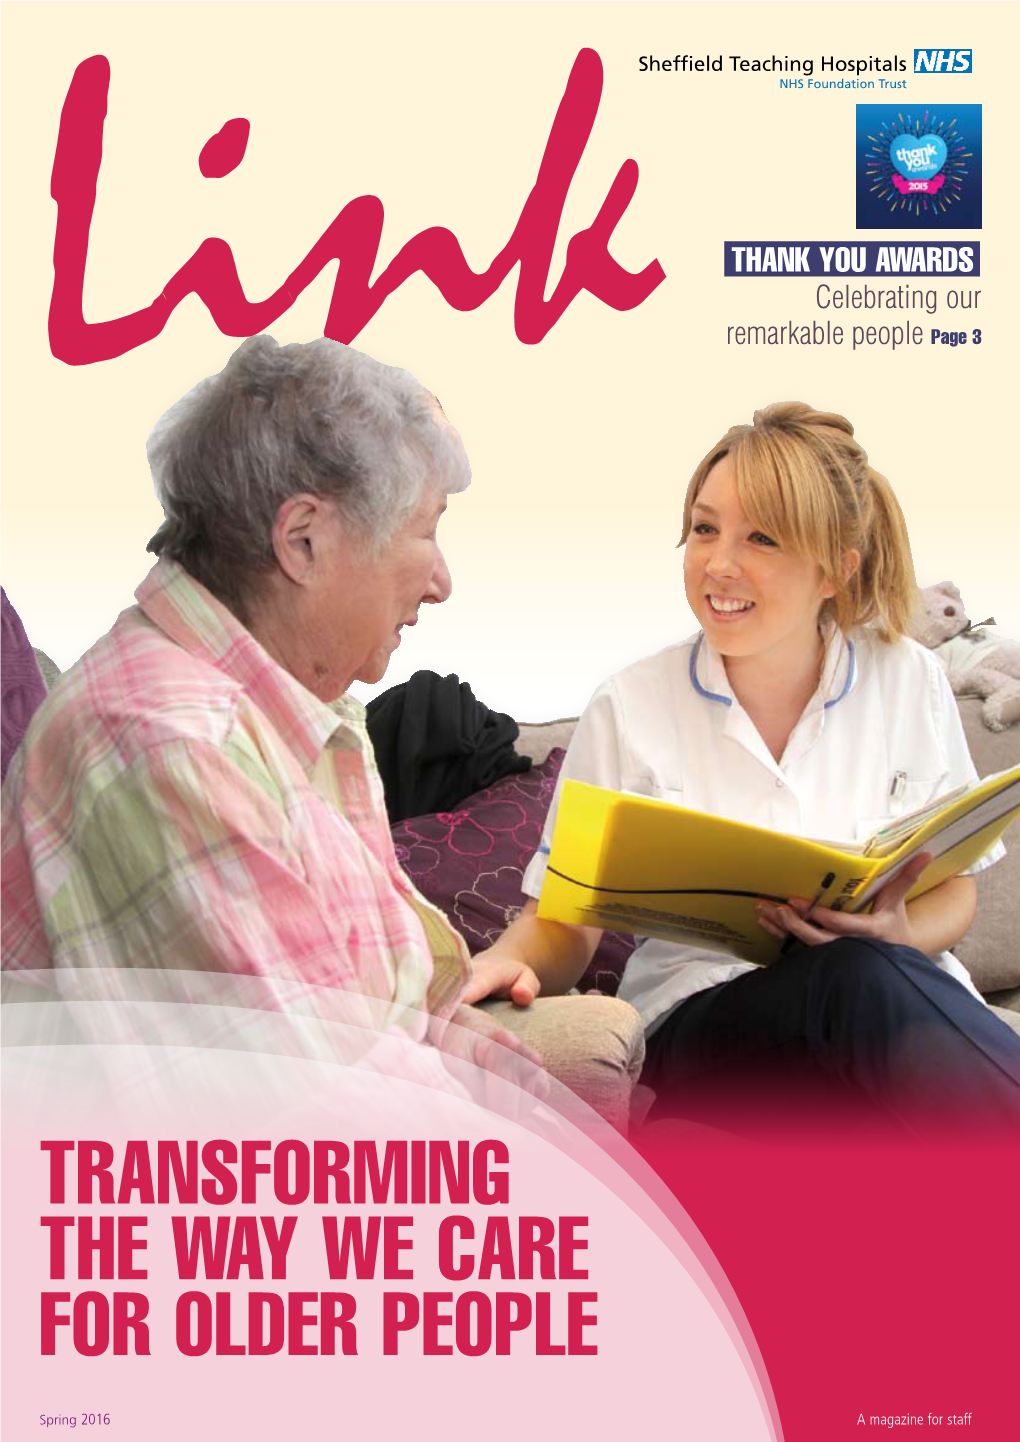 Transforming the Way We Care for Older People